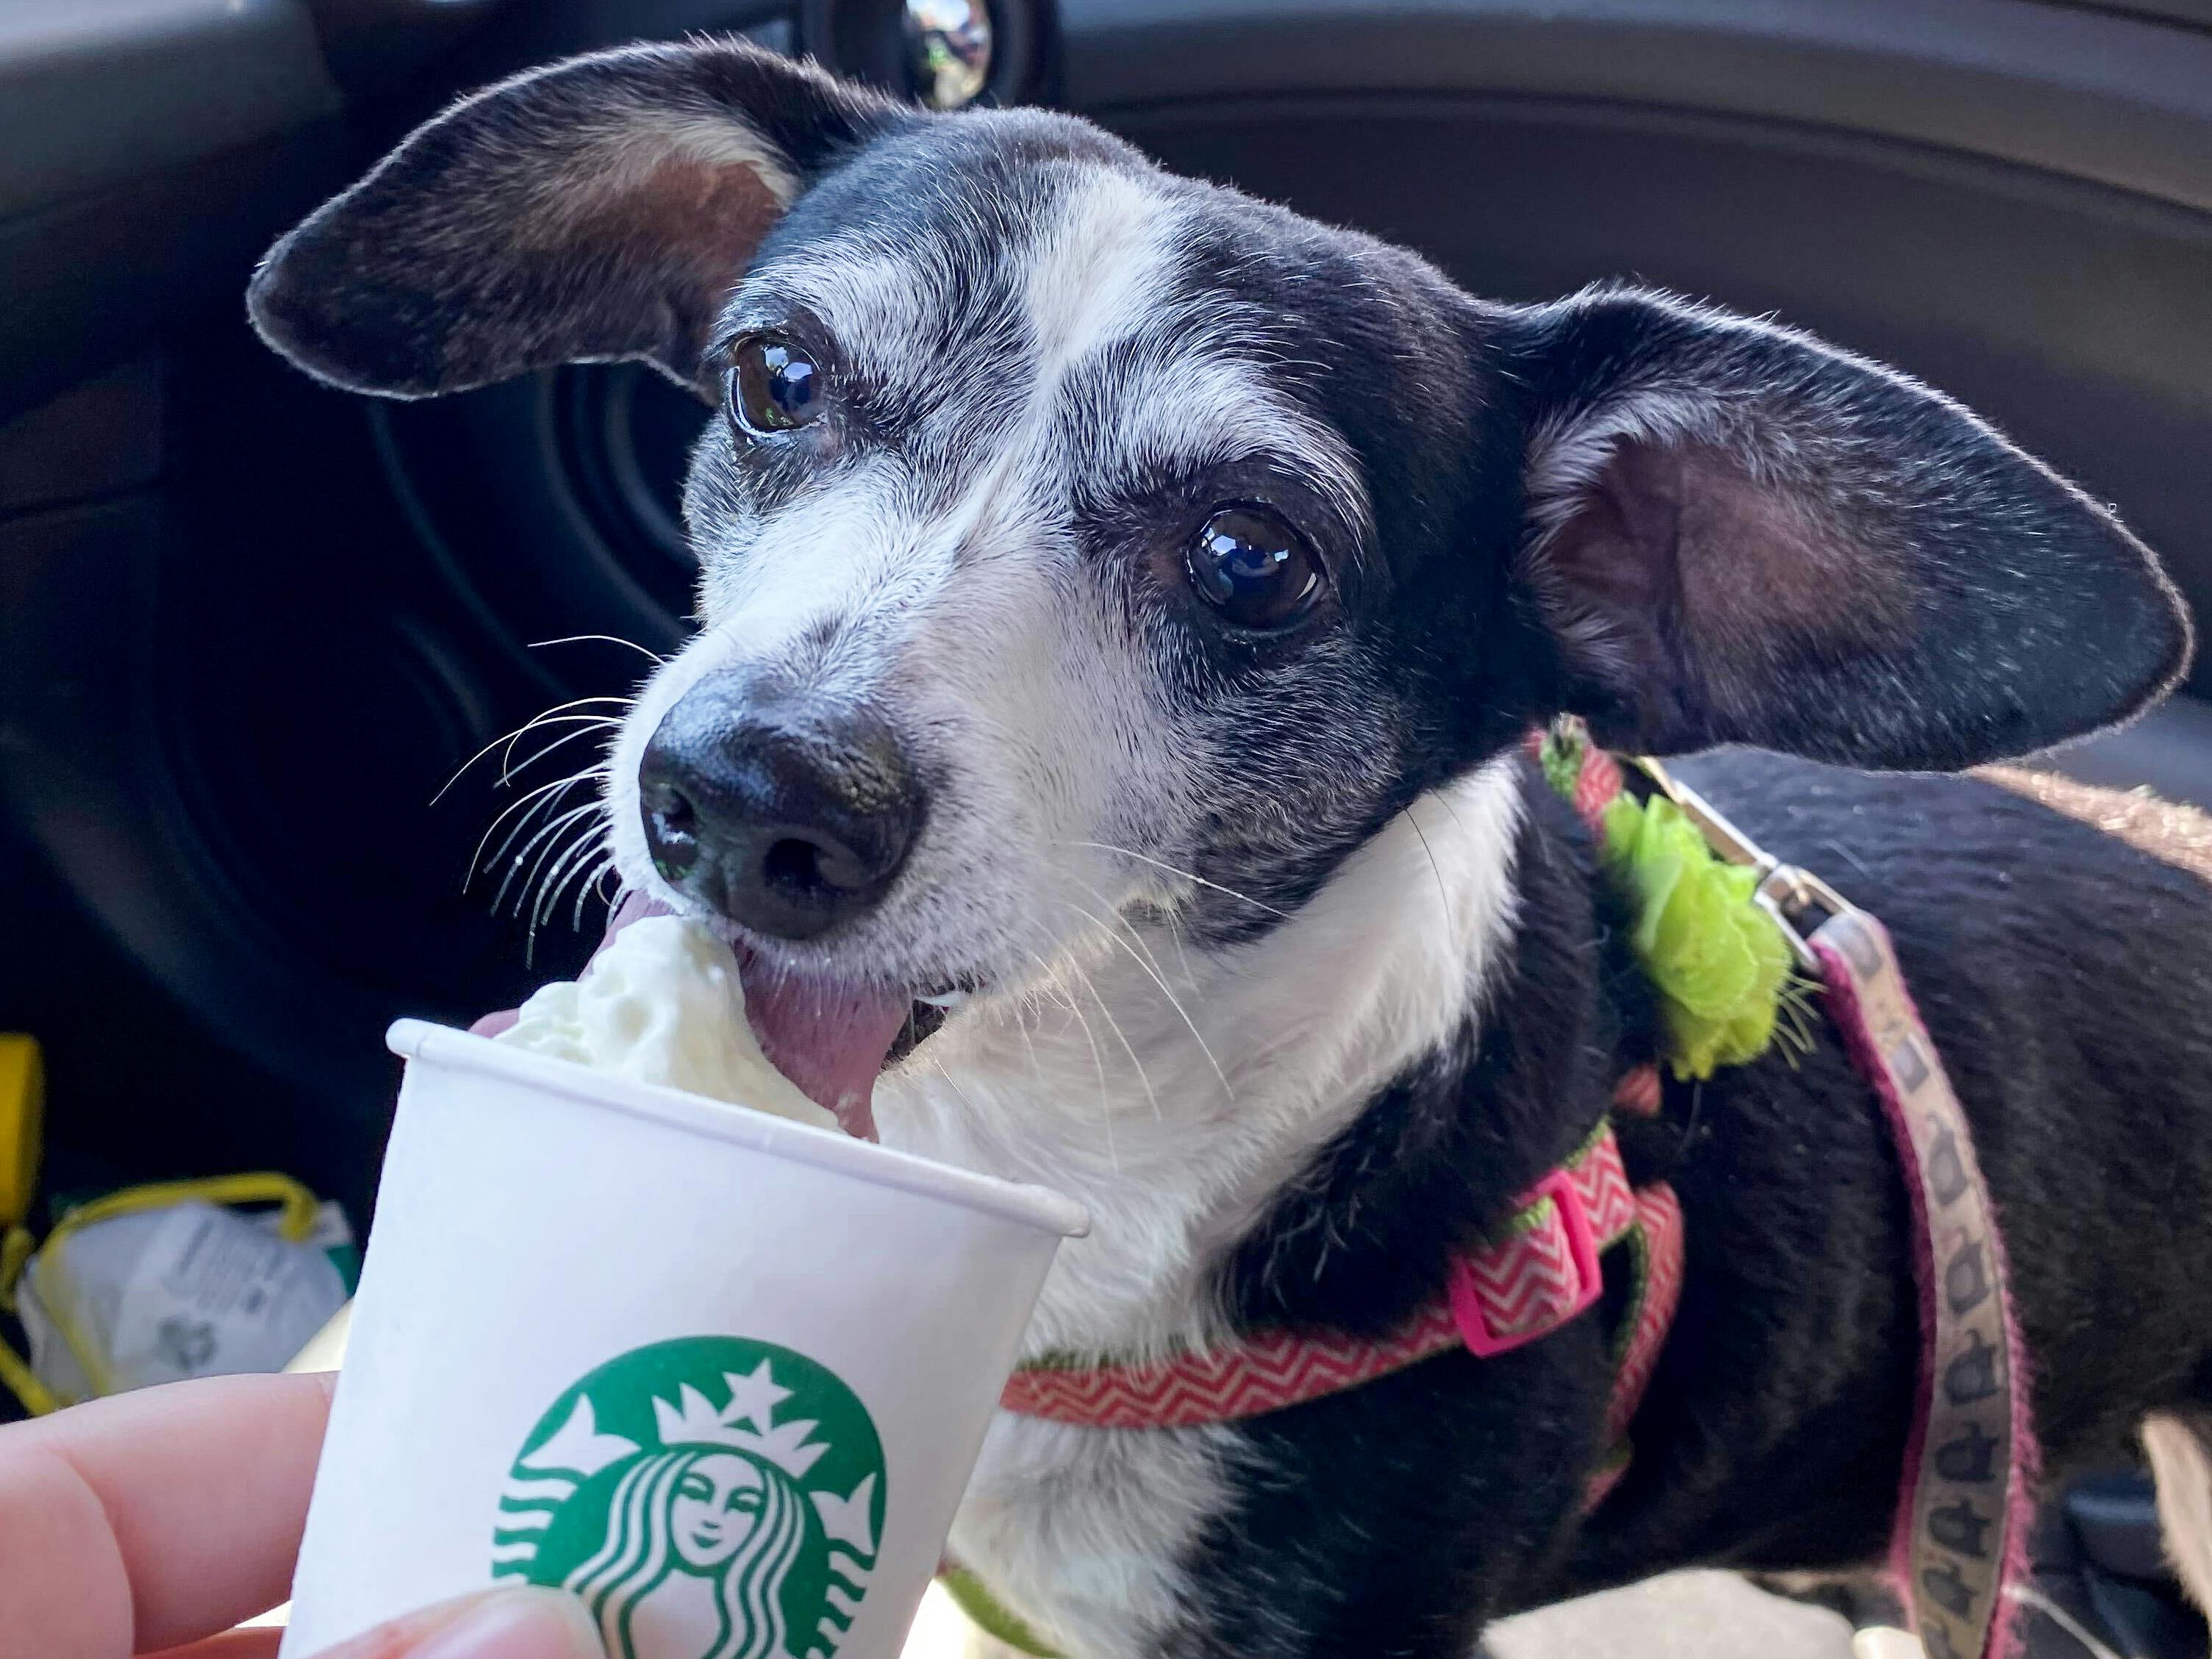 A dog licking whipped cream out of a small Starbucks cup.